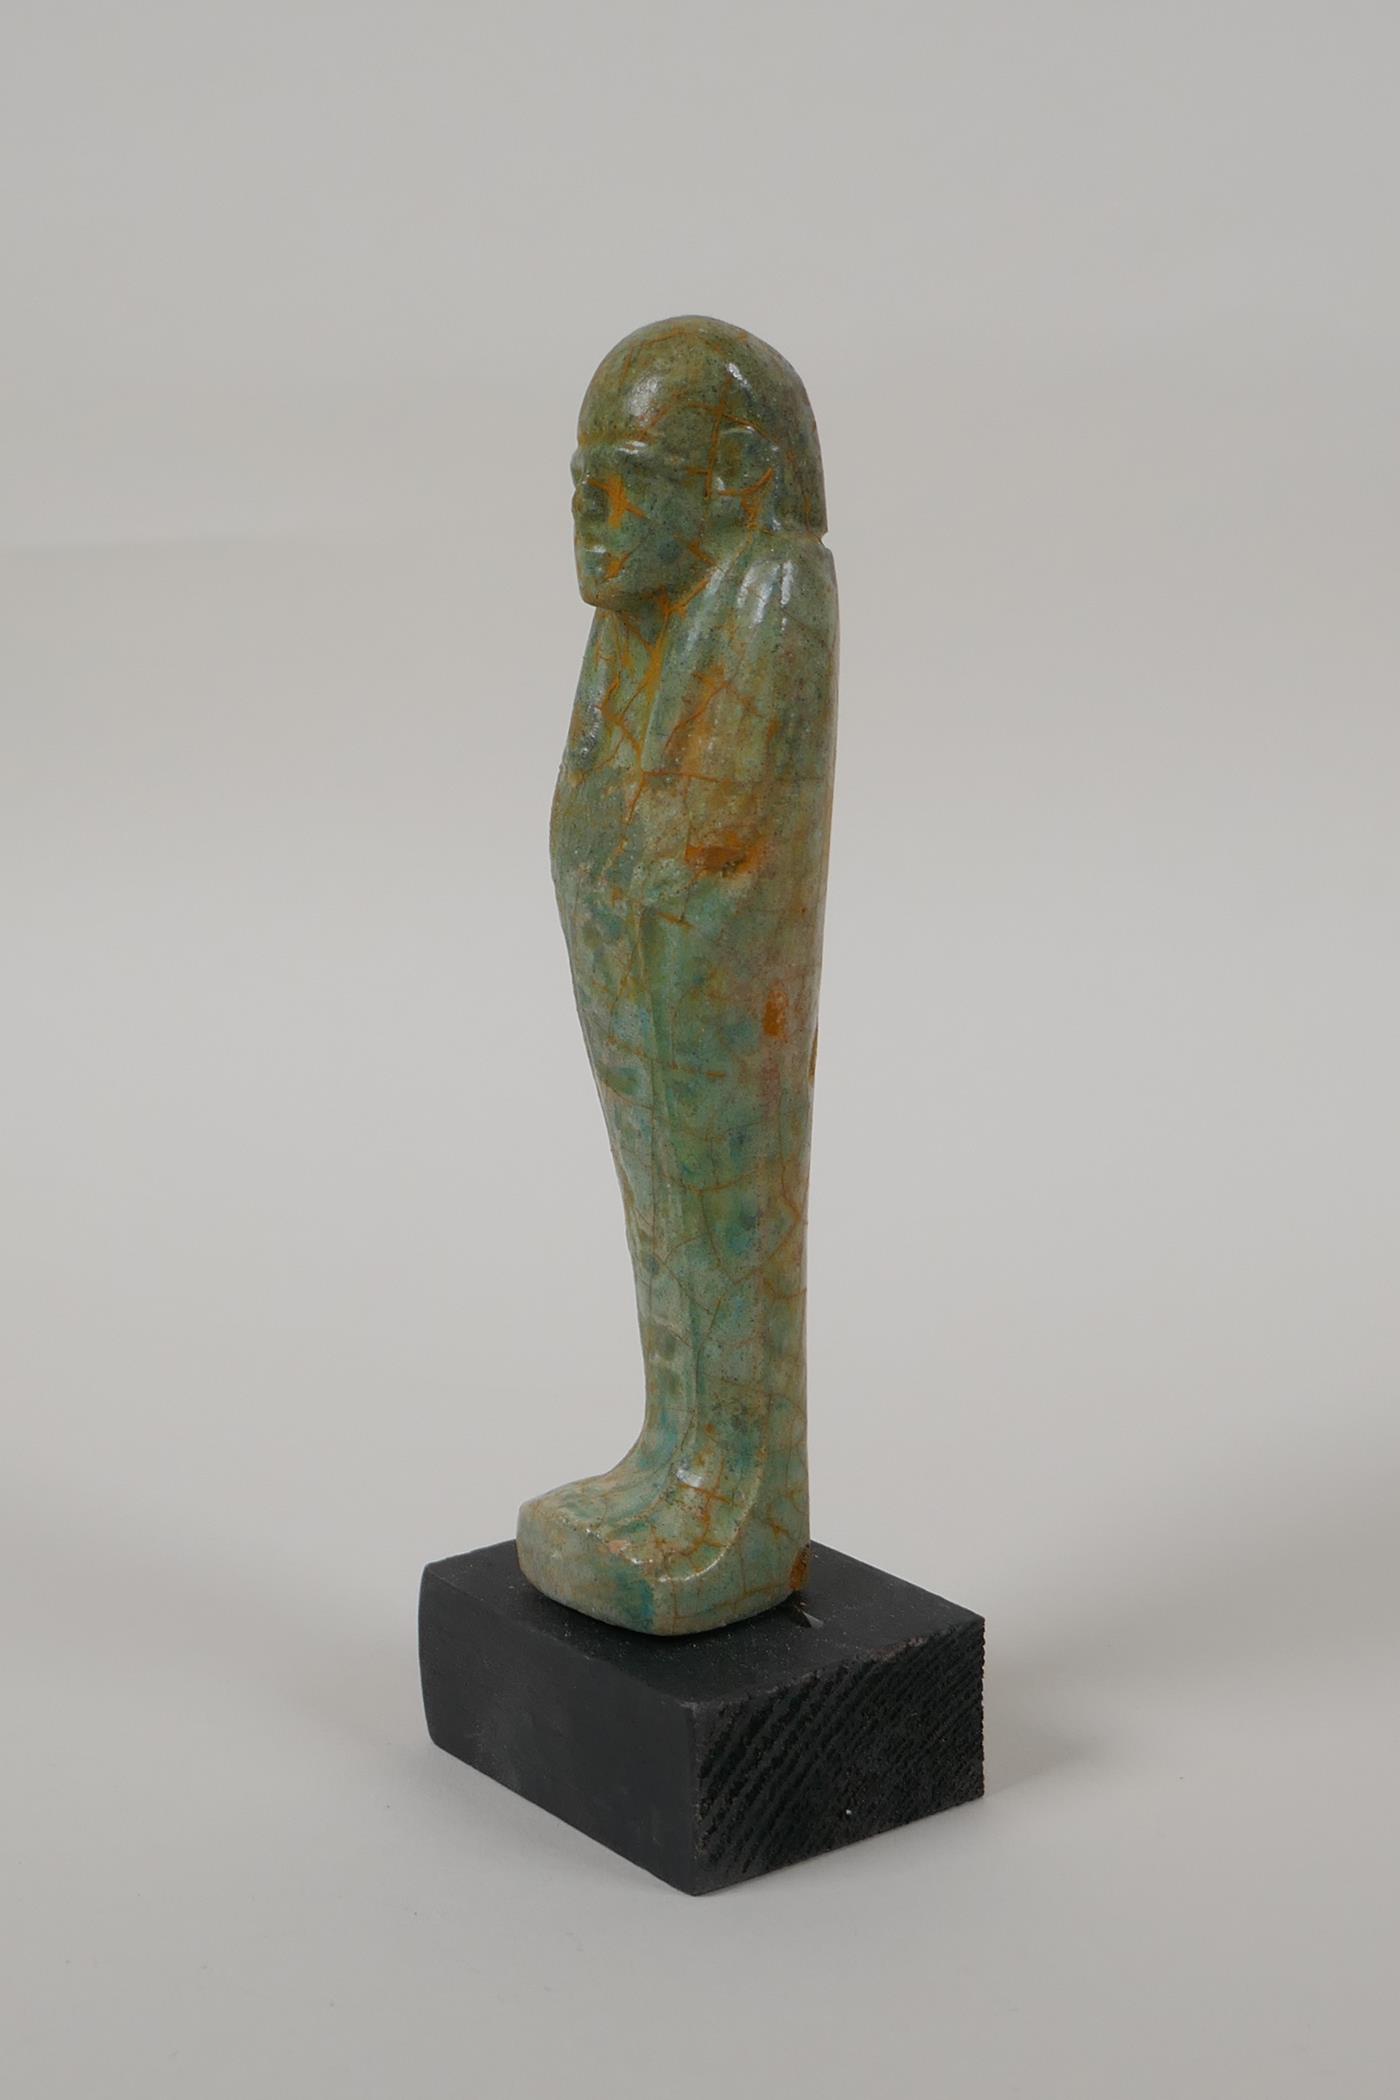 An Egyptian turquoise glazed faience shabti, mounted on a display base, 6" high - Image 5 of 6